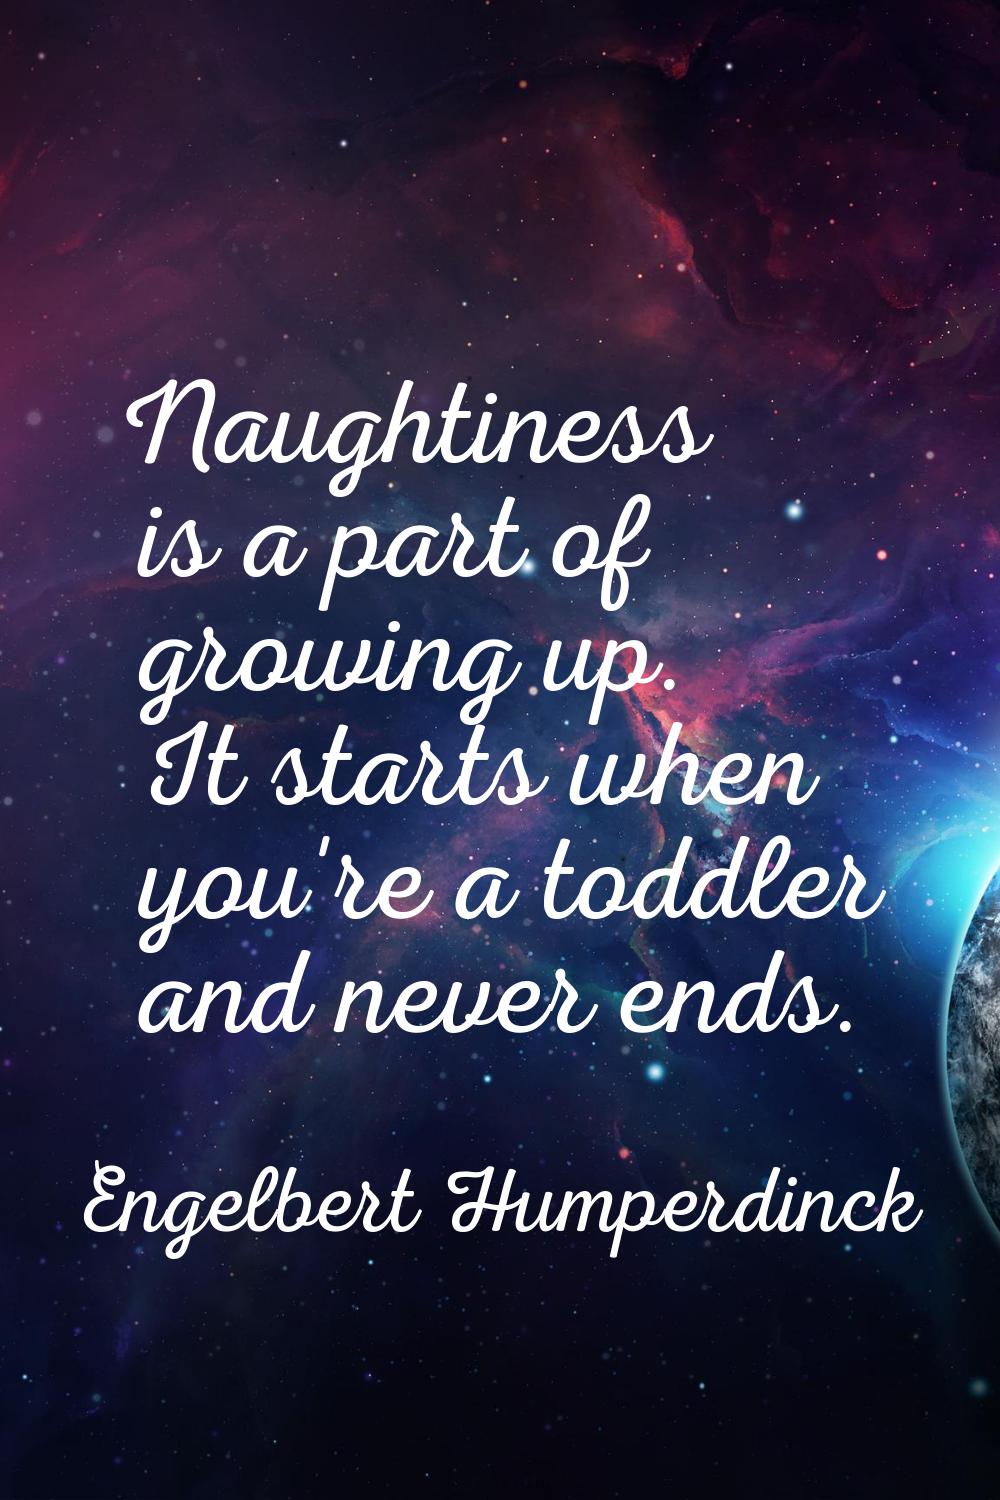 Naughtiness is a part of growing up. It starts when you're a toddler and never ends.